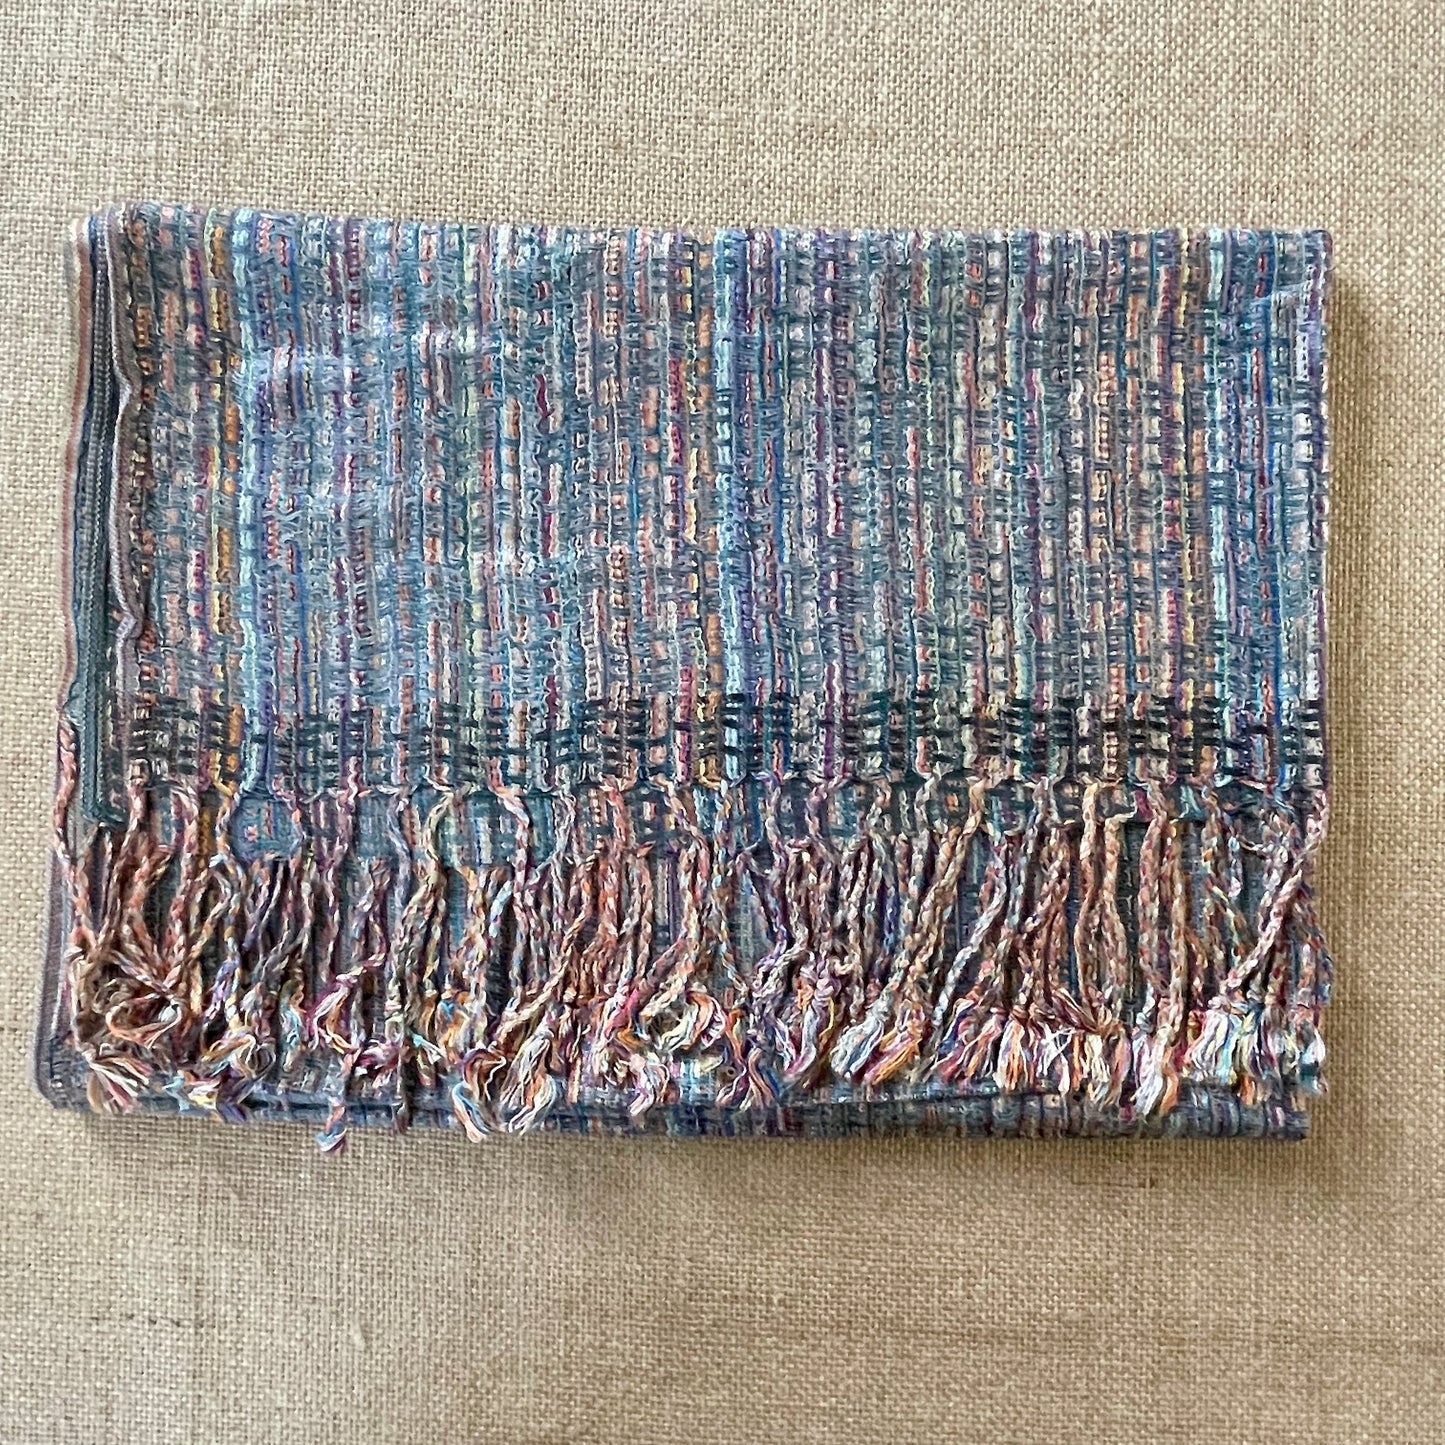 Woven Moroccan Pashmina Scarf in Sage Green folded